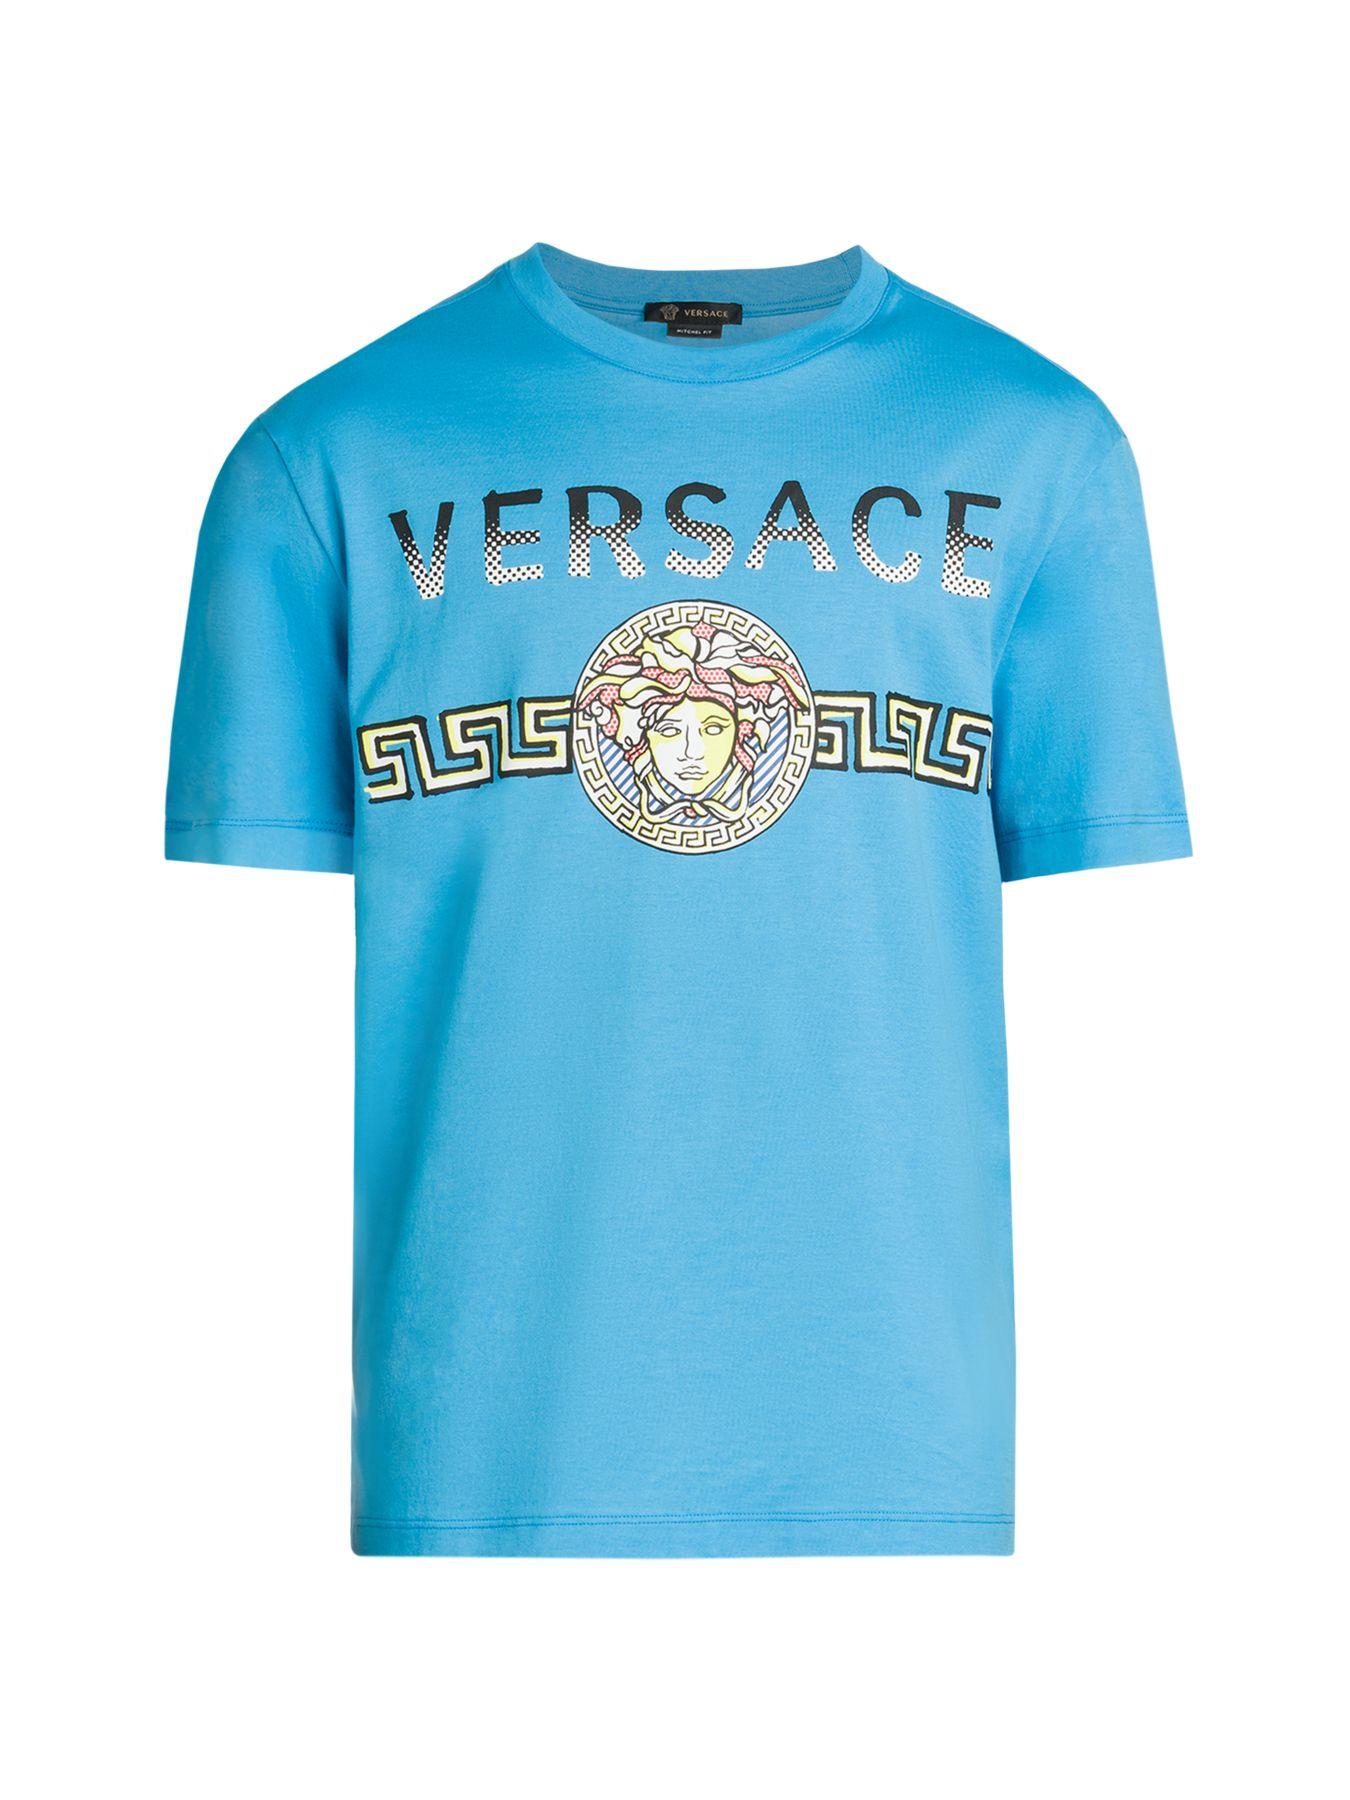 Versace Cotton Graphic T-shirt in Turquoise (Blue) for Men - Lyst